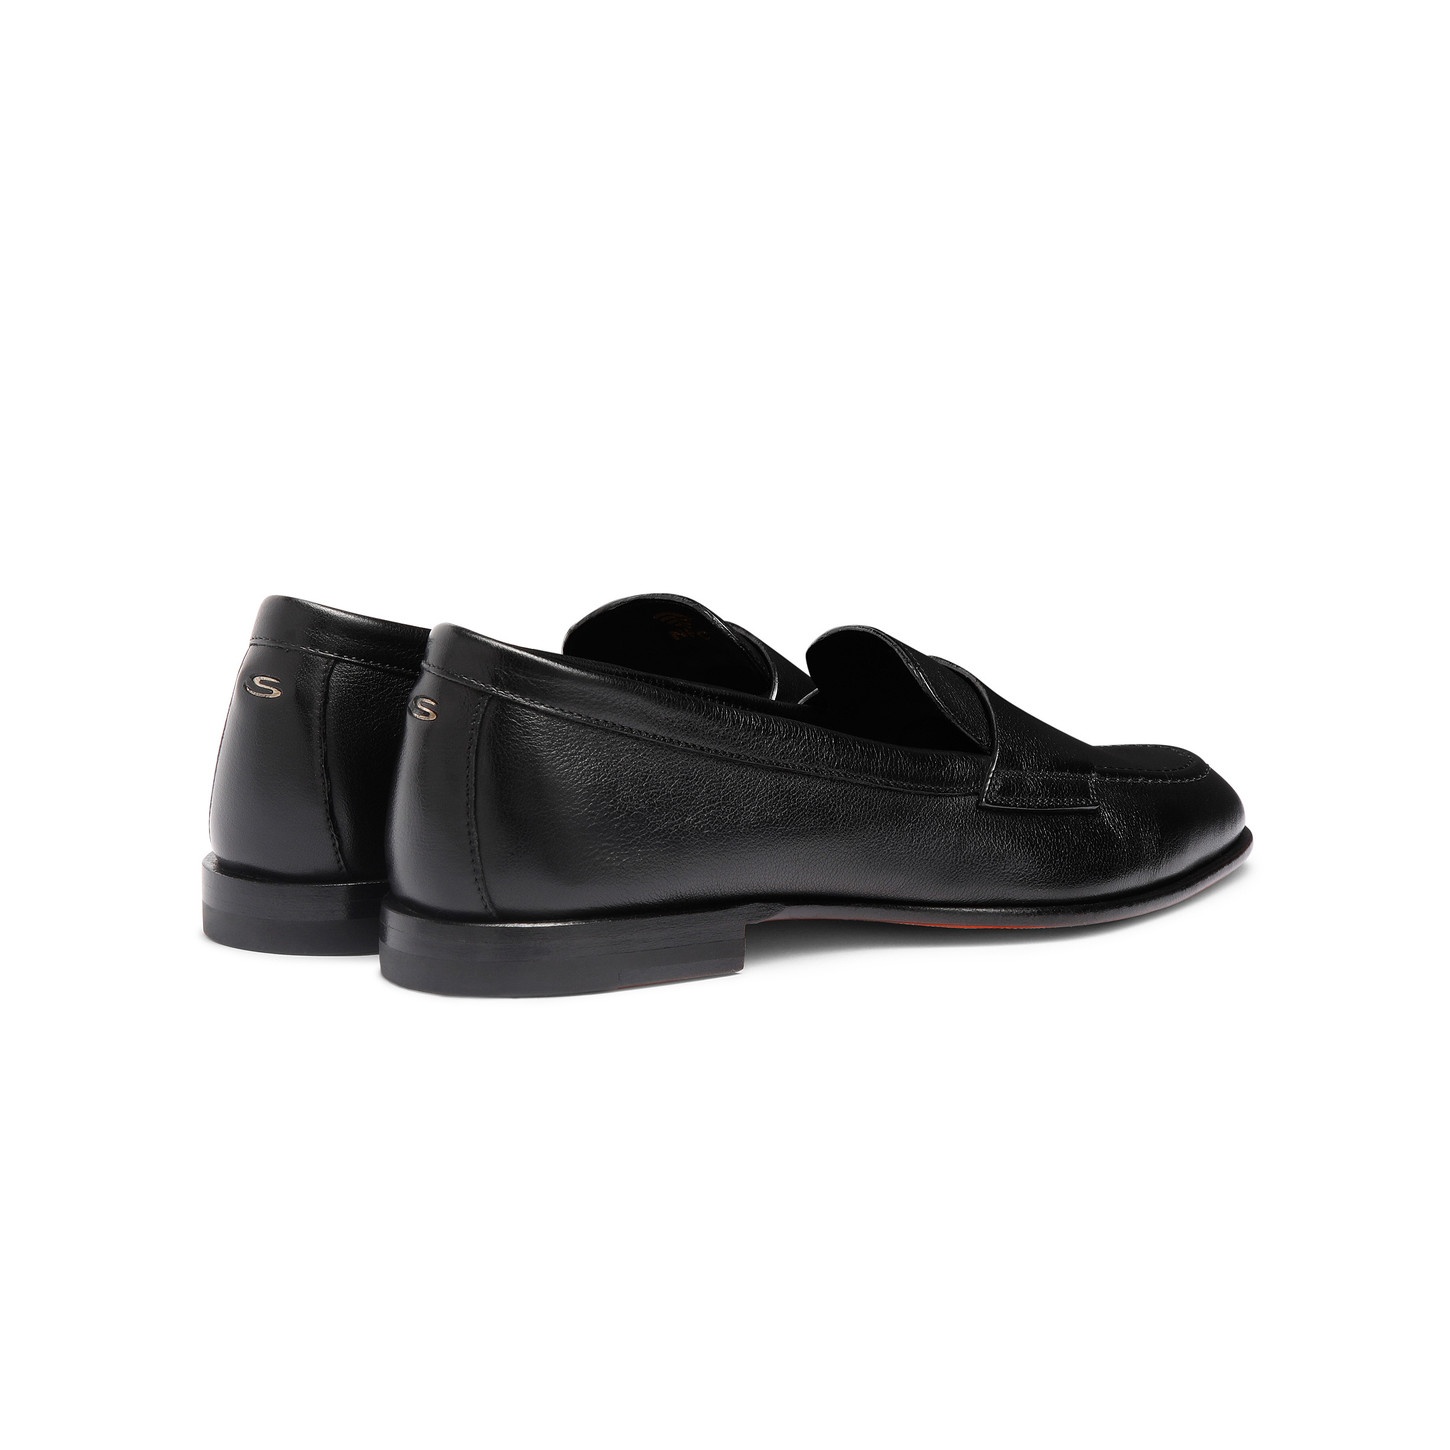 Women’s black leather penny loafer - 4